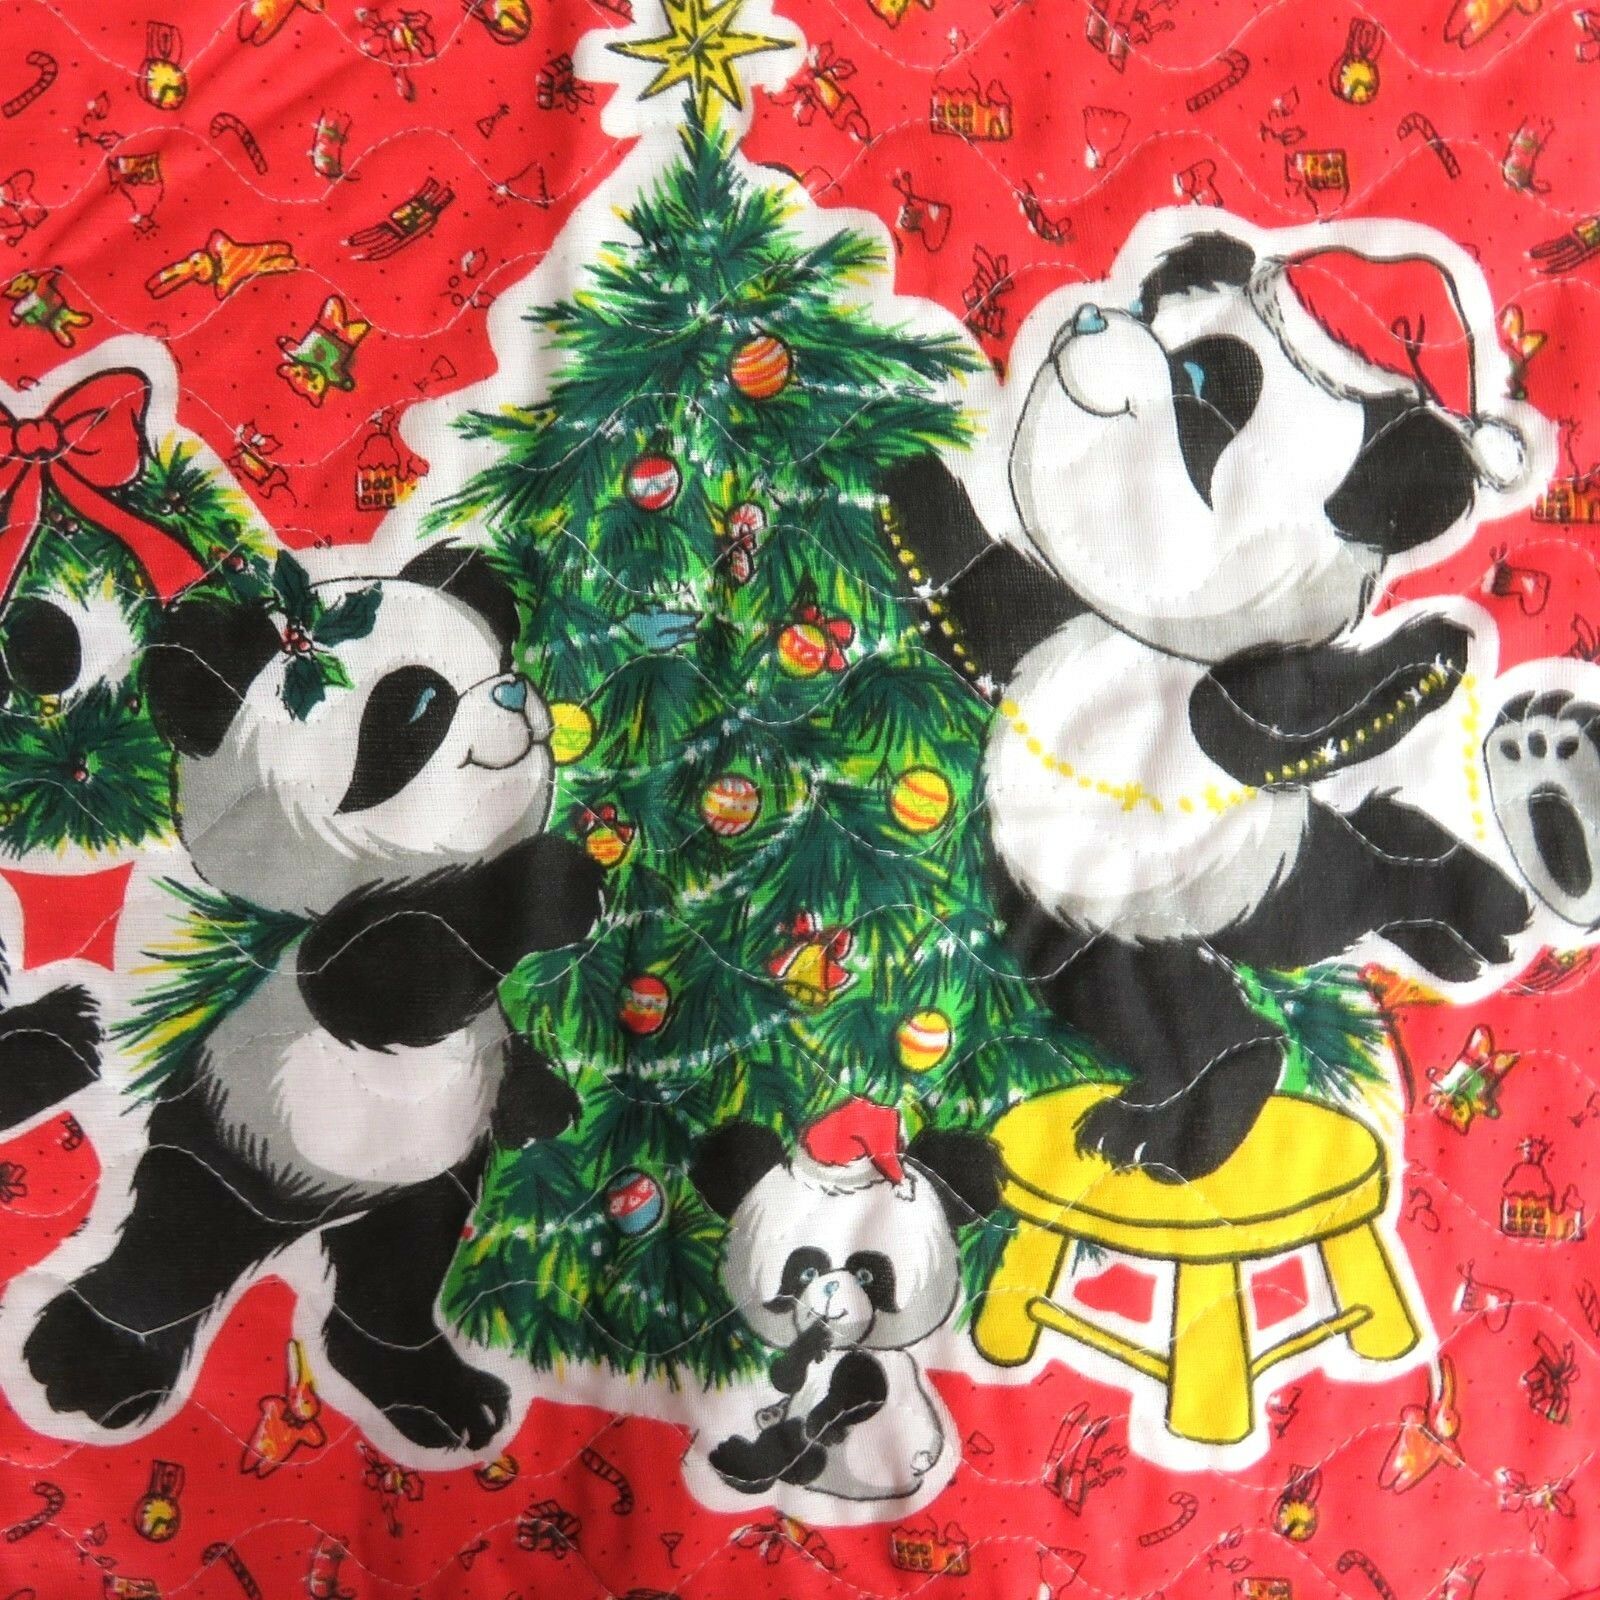 Vintage Panda Bear Christmas Tree Skirt Red Quilted Printed Red Green - At Grandma's Table